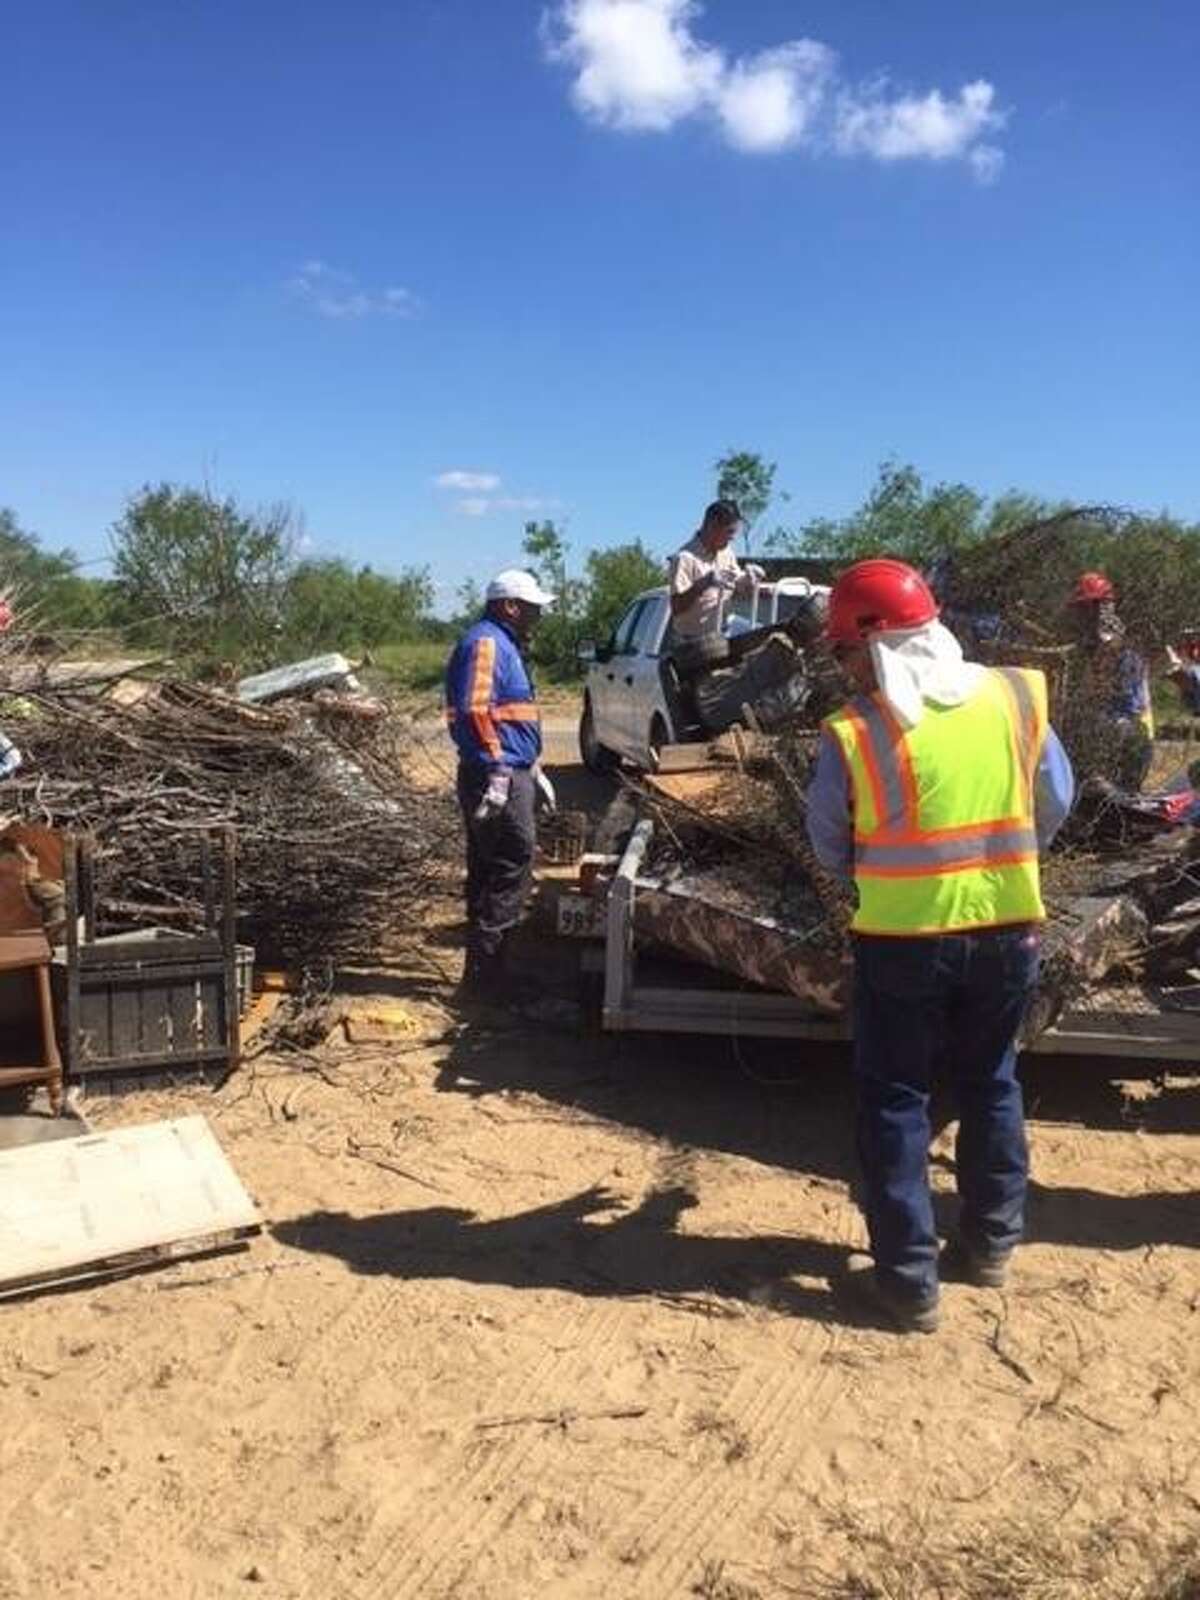 More than 30 Webb County employees and community volunteers assist El Cenizo residents in picking up and disposing of unwanted items on Tuesday.